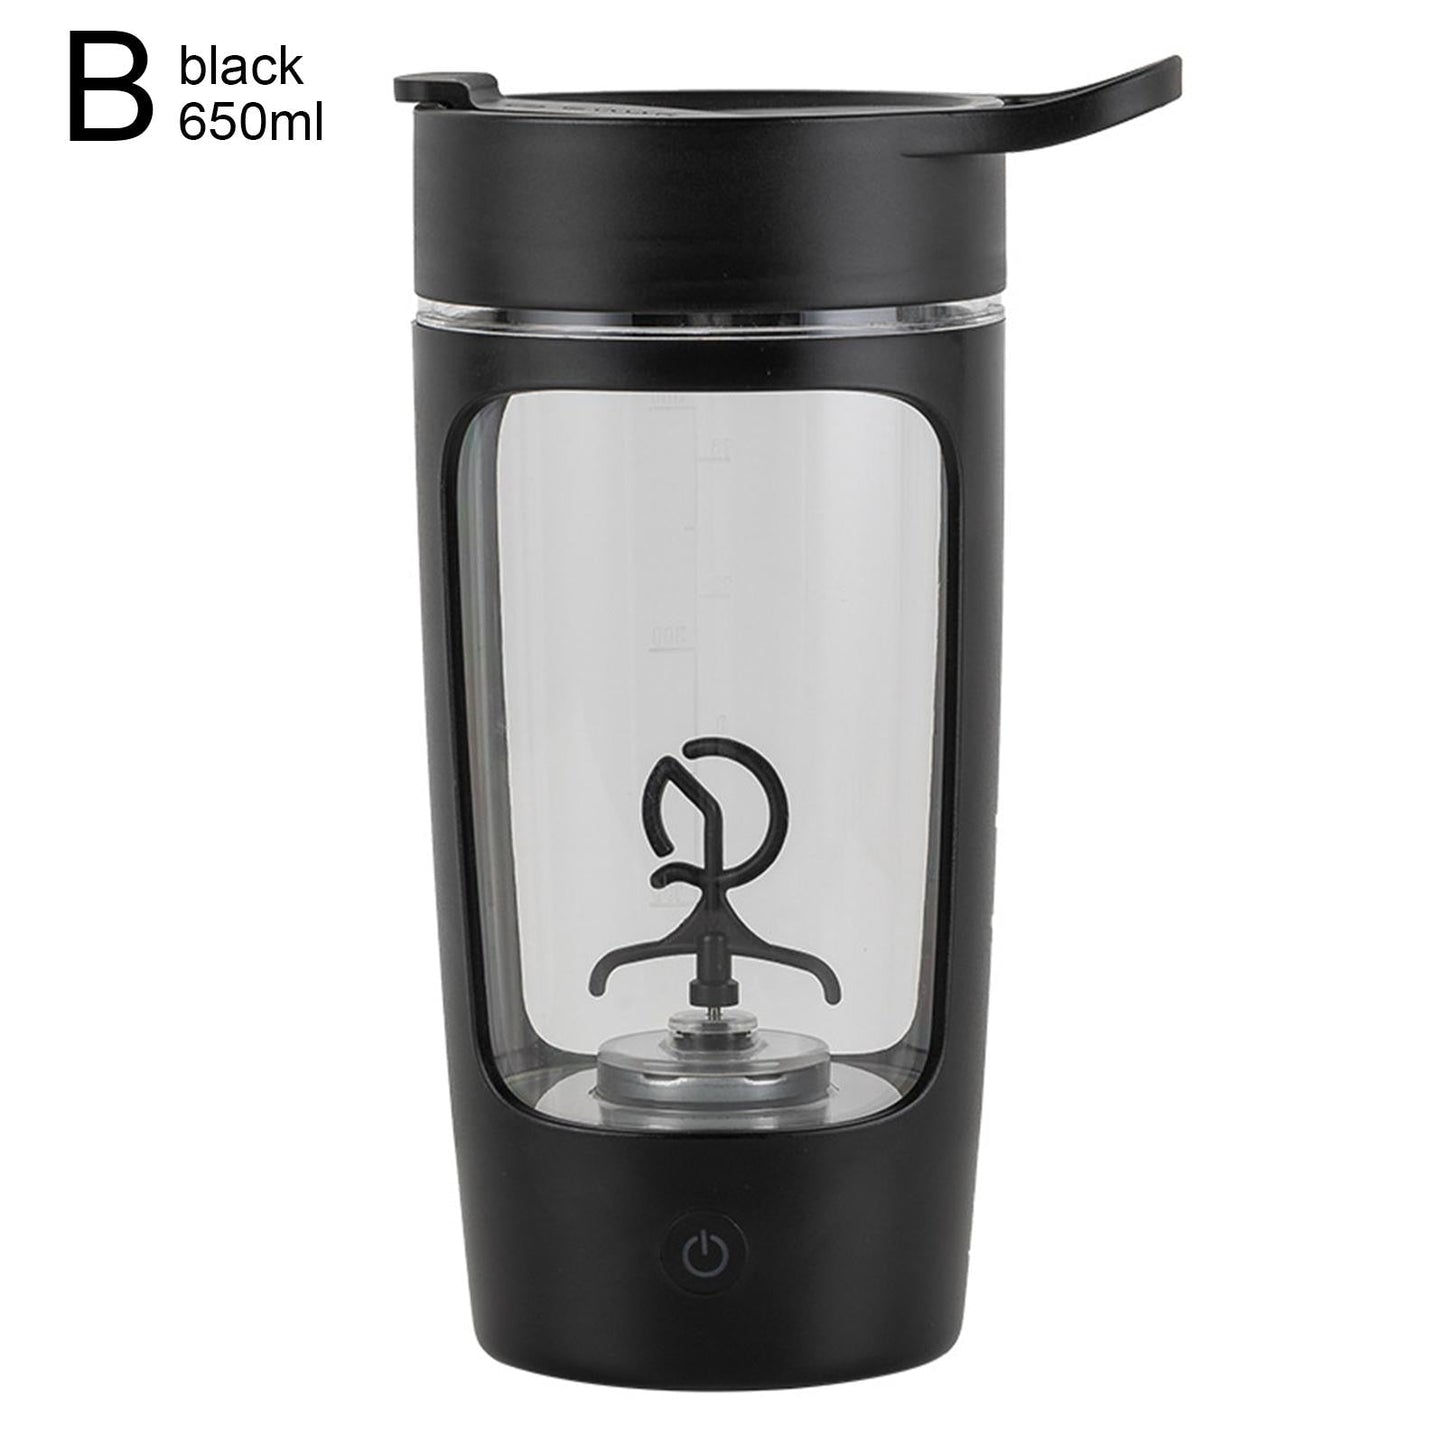 Strong Electric Protein Shaker Blender